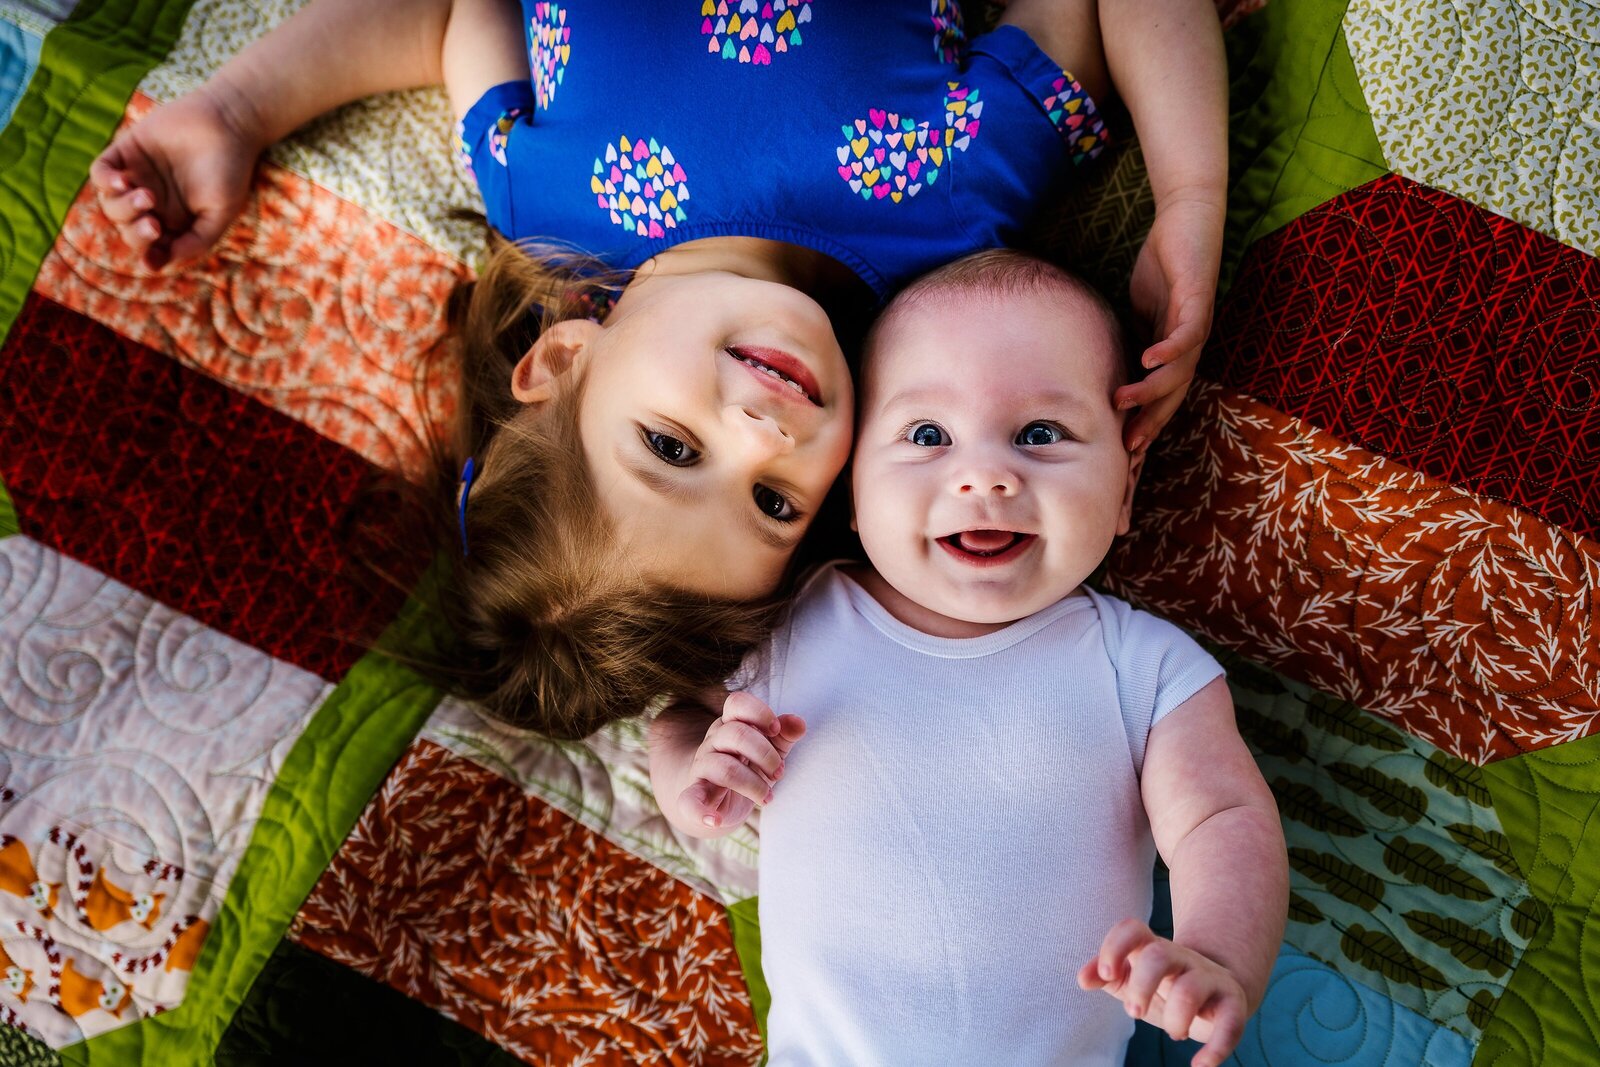 Toddler and baby smiling at camera on colorful quilt